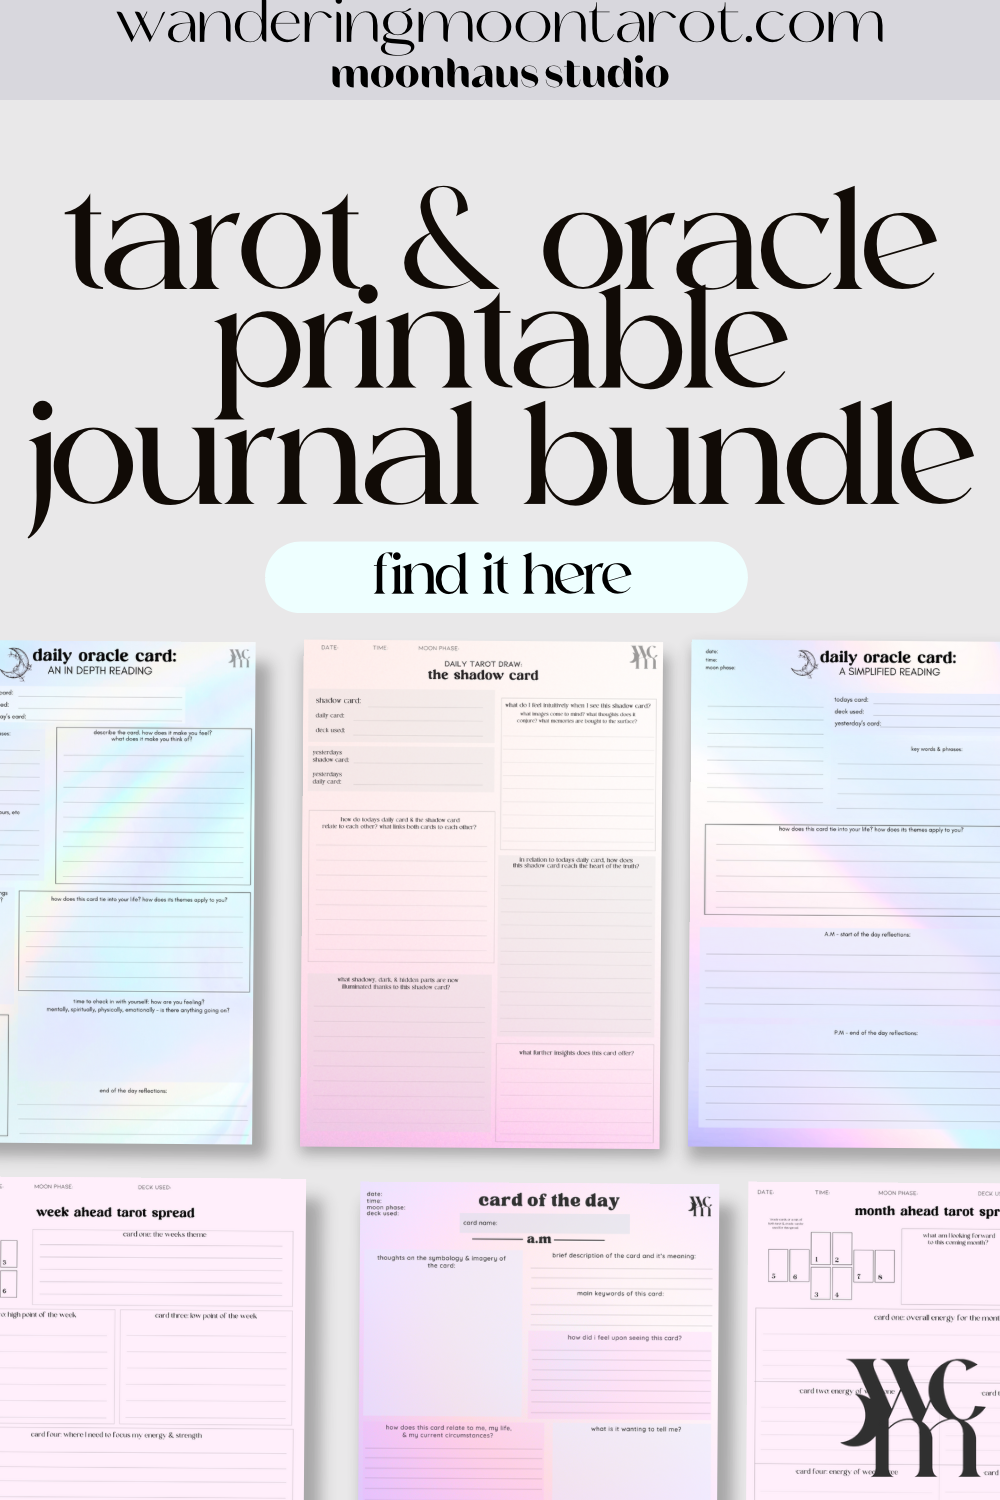 tarot & oracle journaling bundle - daily journal pages